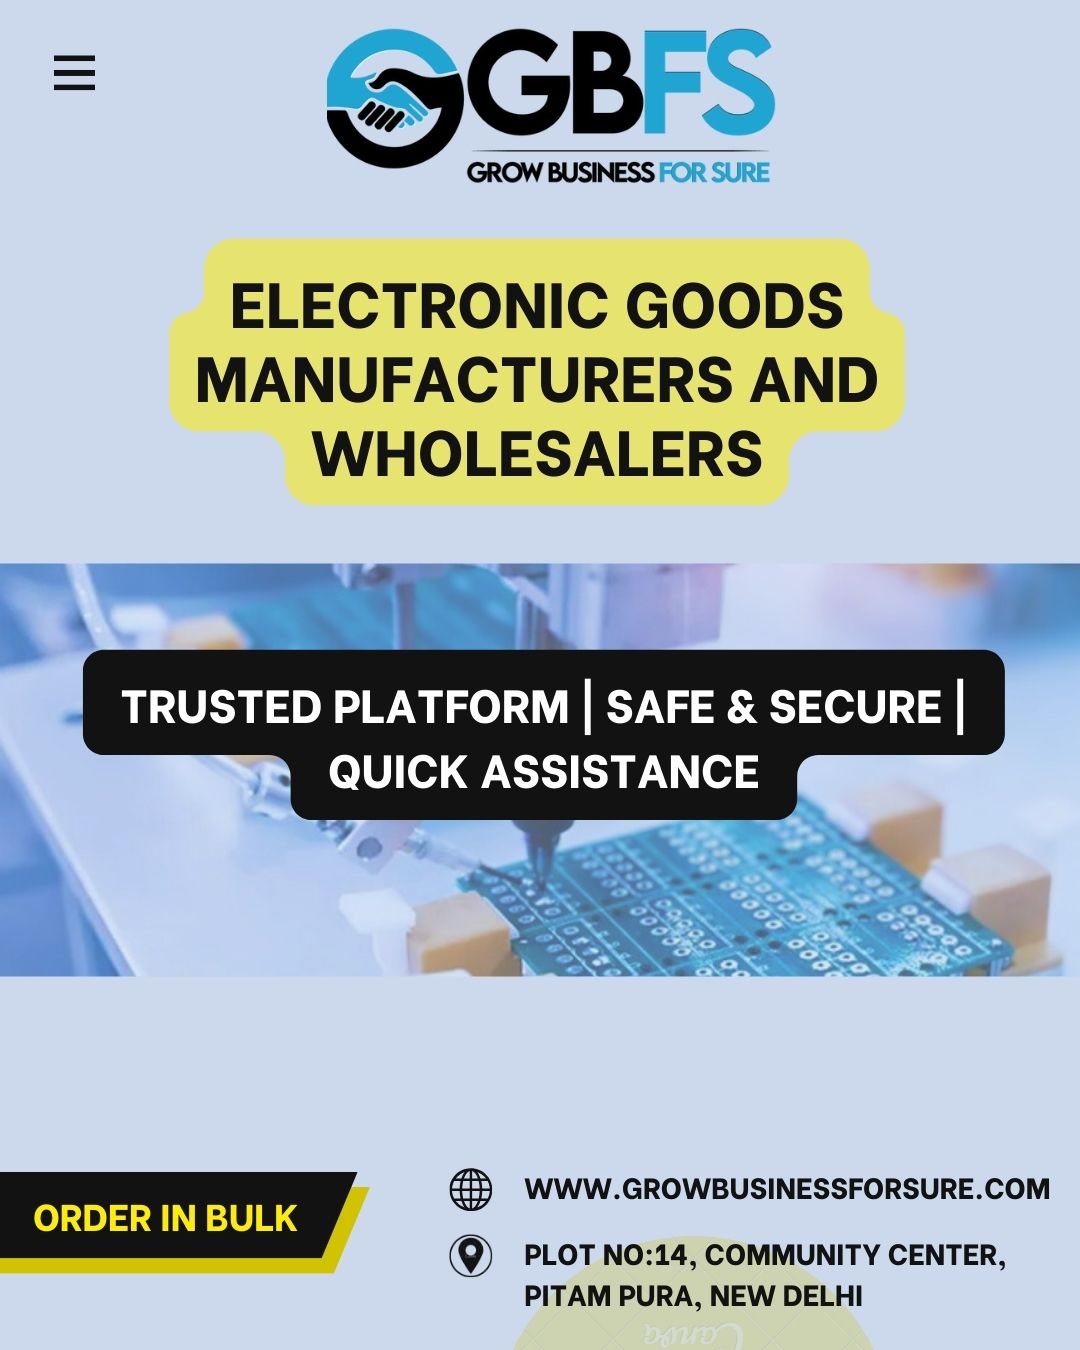 The Strategic Role of B2B in Elevating Electronic Goods Manufacturers and Wholesalers